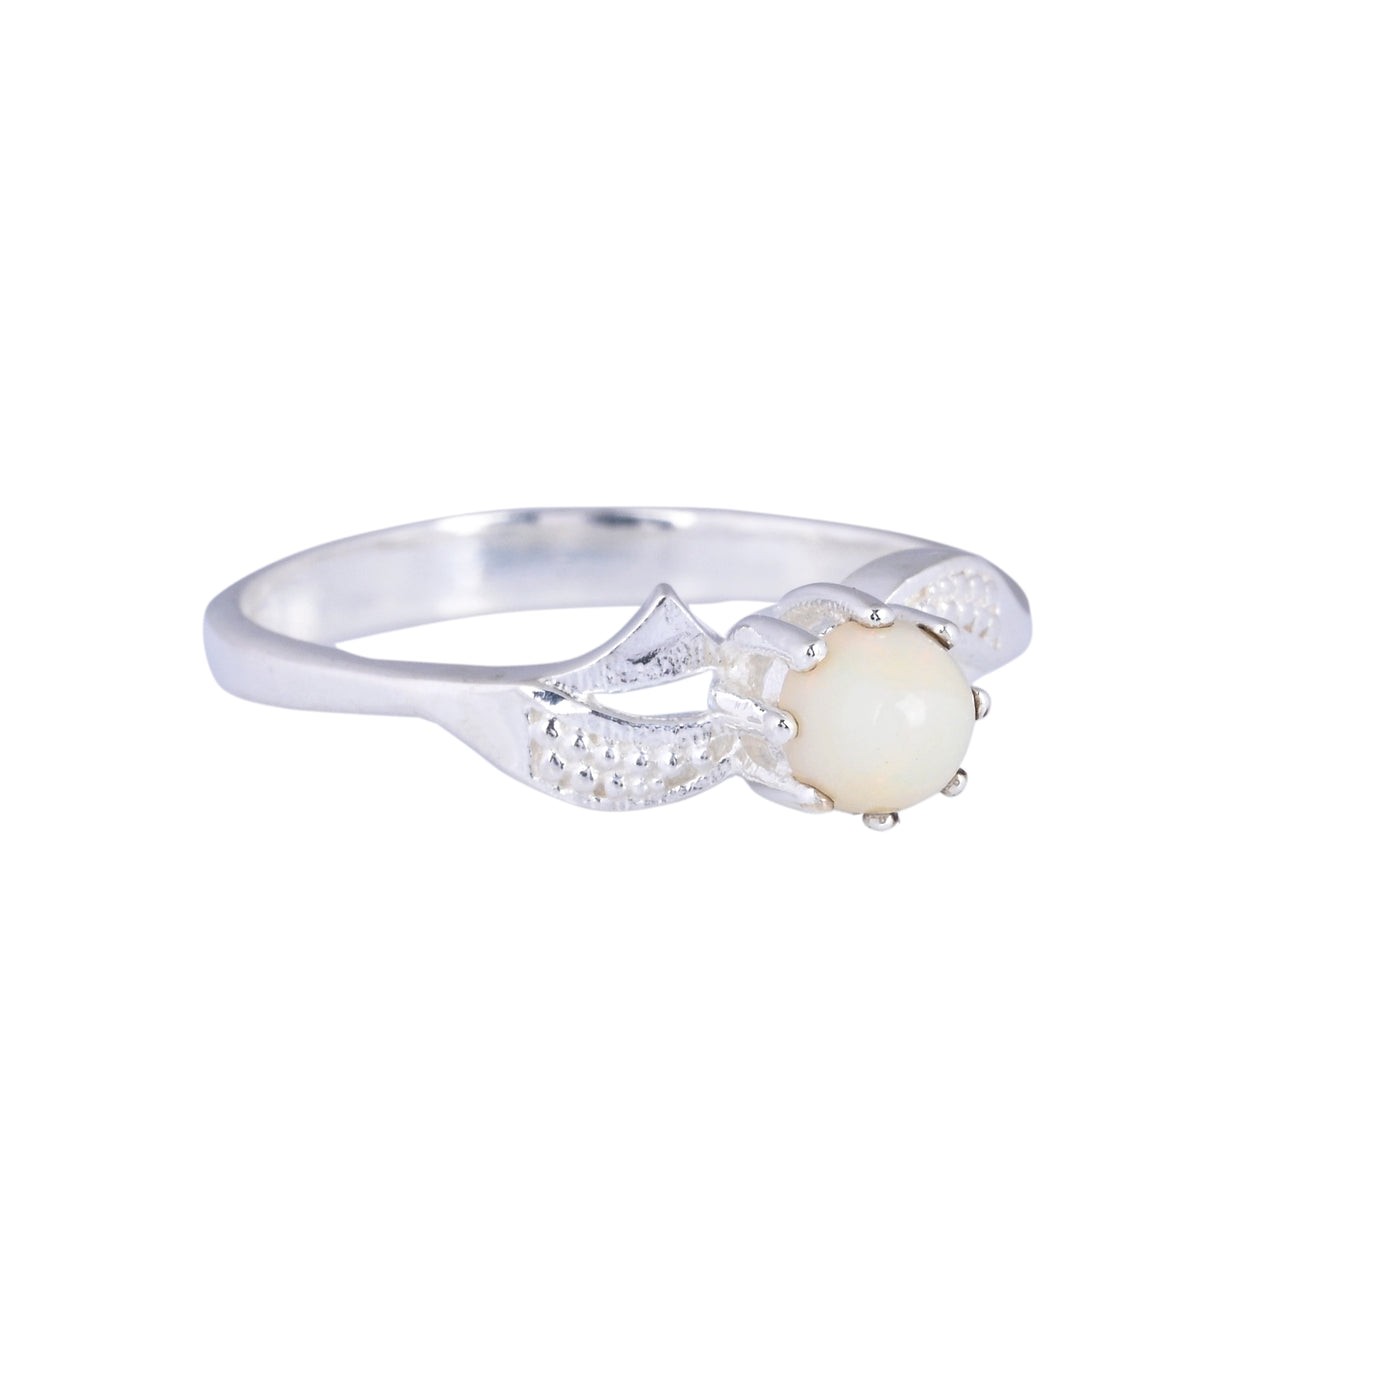 Natural Round Fire Opal Gemstone Sterling Silver Ring